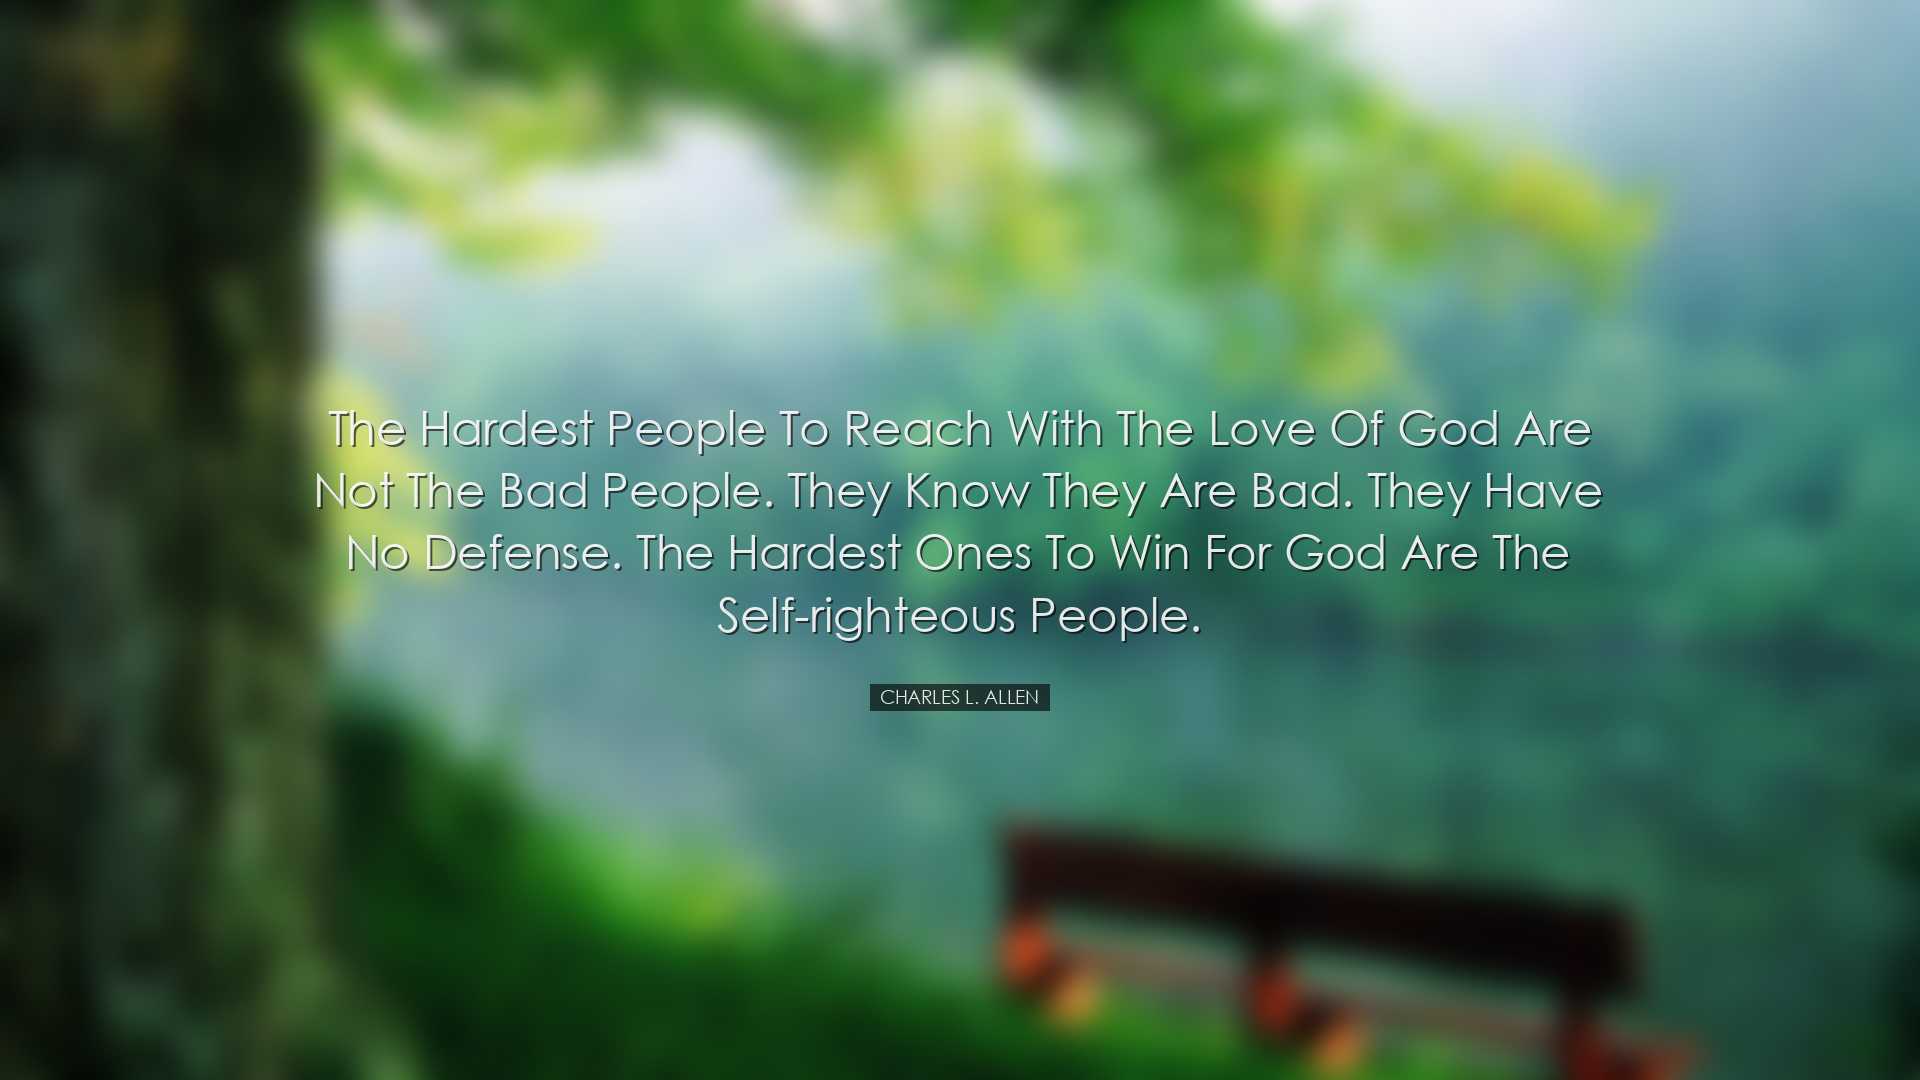 The hardest people to reach with the love of God are not the bad p